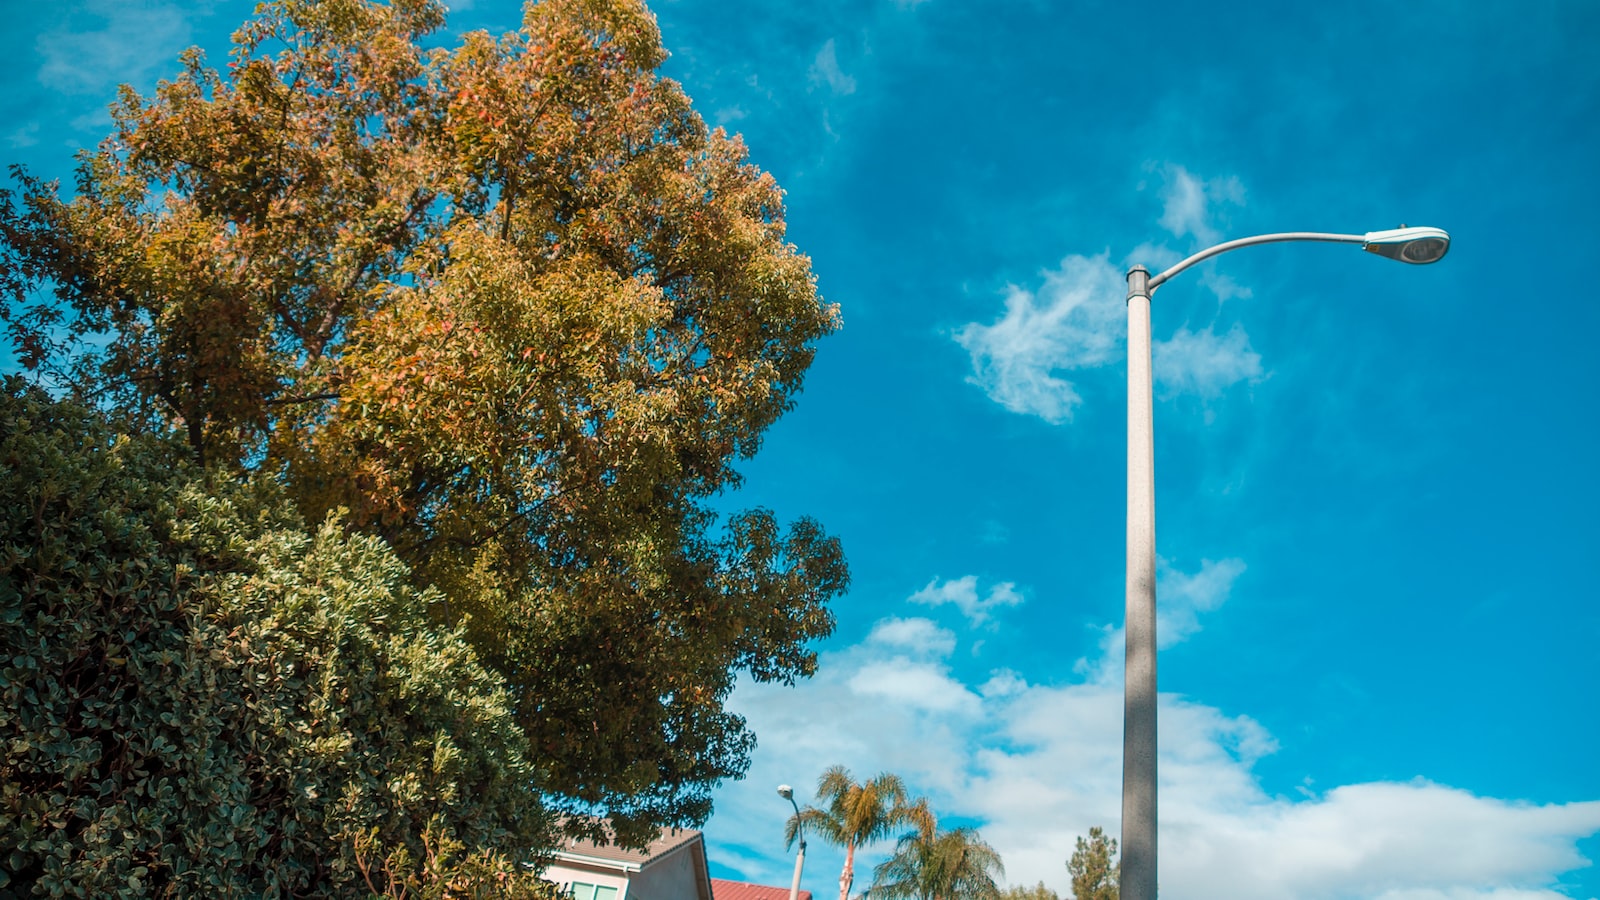 Brighten Up Your Feed With These Street Light Captions